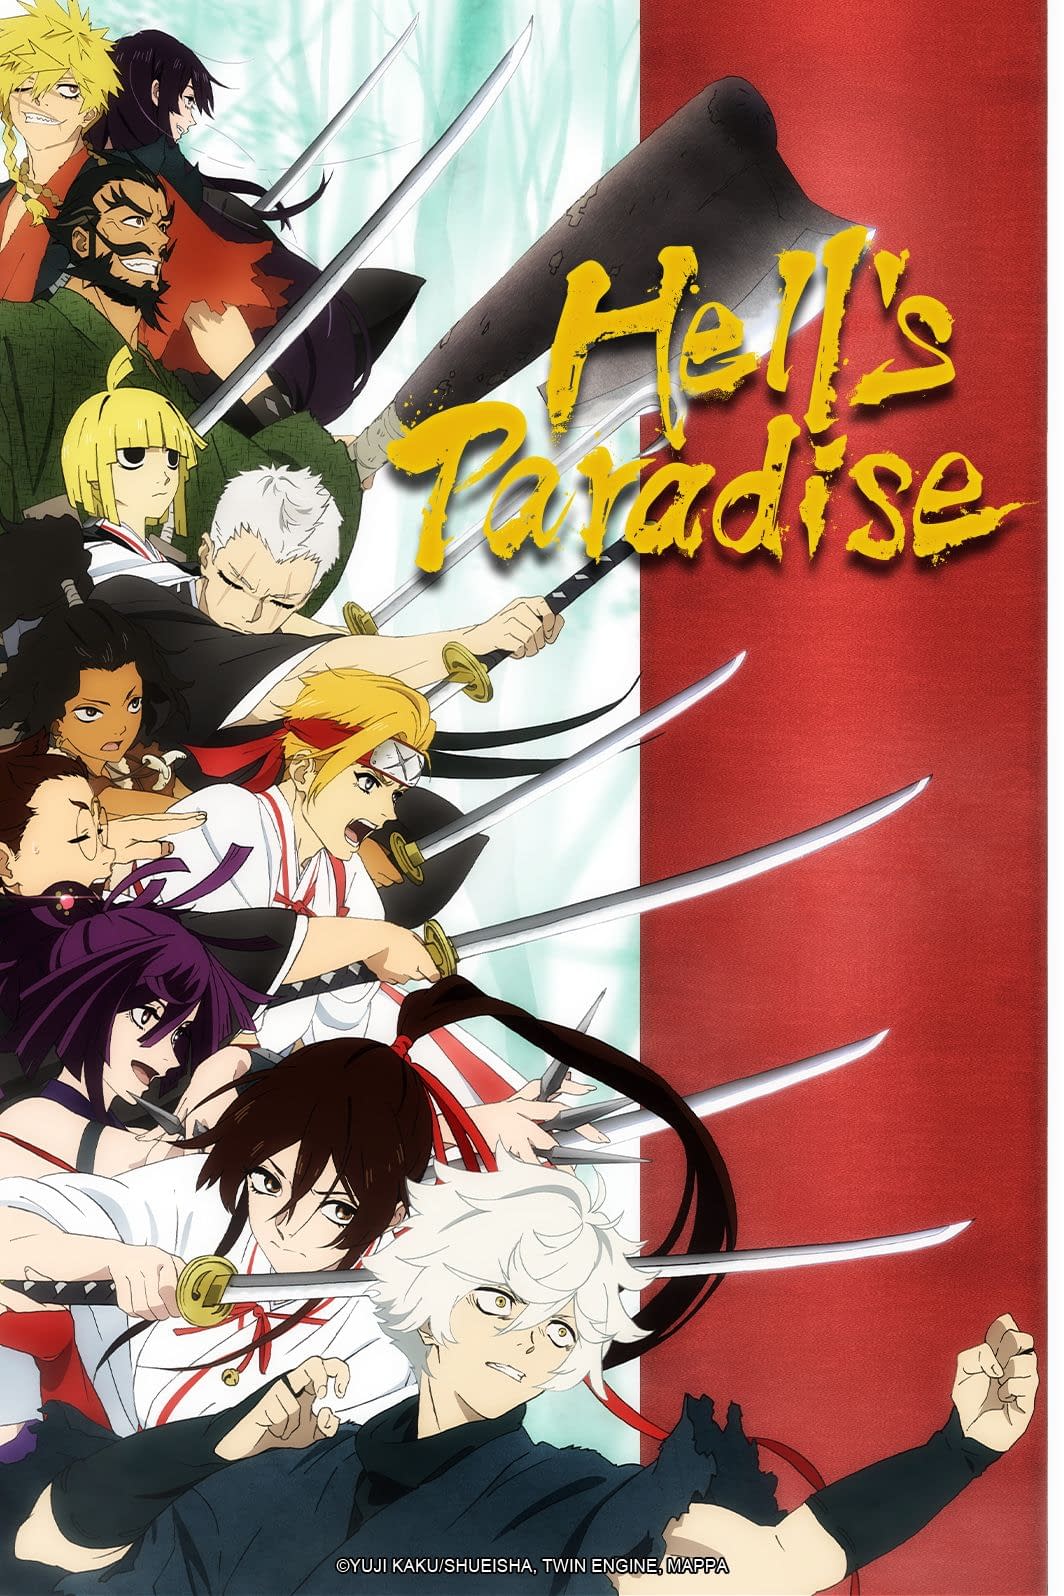 Is There a Hell's Paradise Episode 14 Release Date & Time?